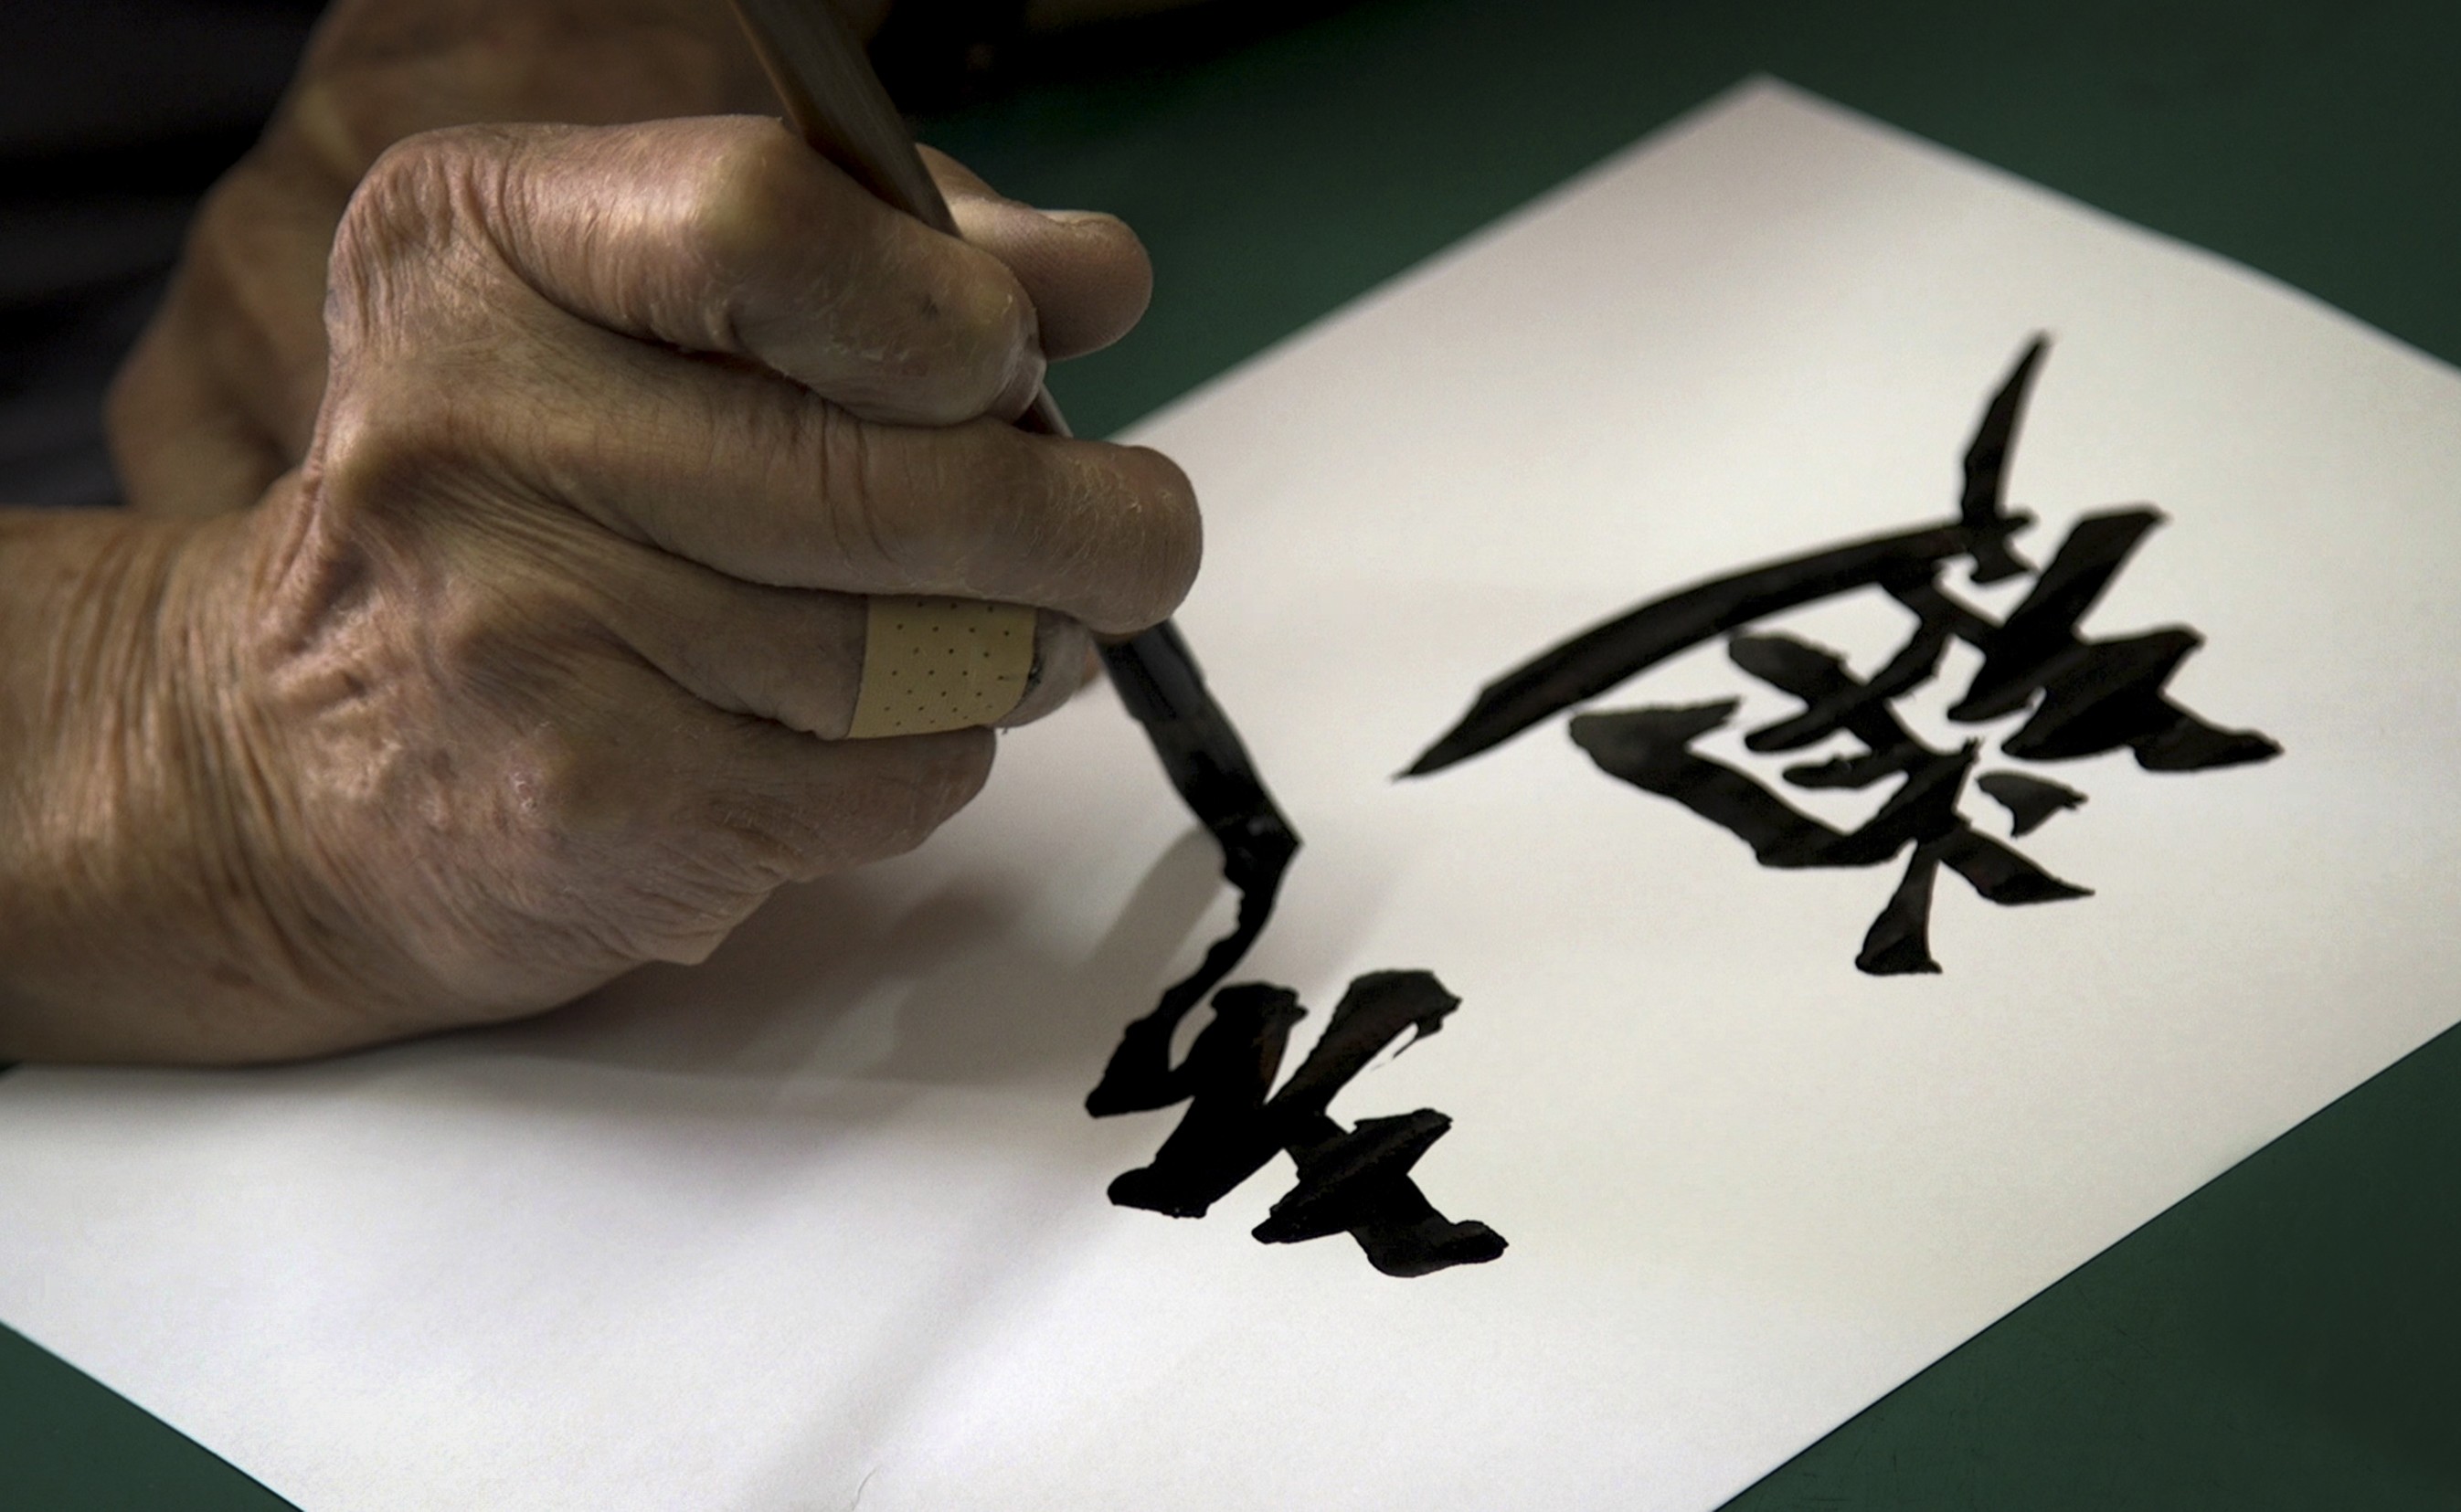 Yeung Kai, 82, has devoted his life to the unique, expressive calligraphy style used on Hong Kong neon lights and shop signs, a trade that is now dying. A graphic designer is digitising the characters for a typeface to give it new life